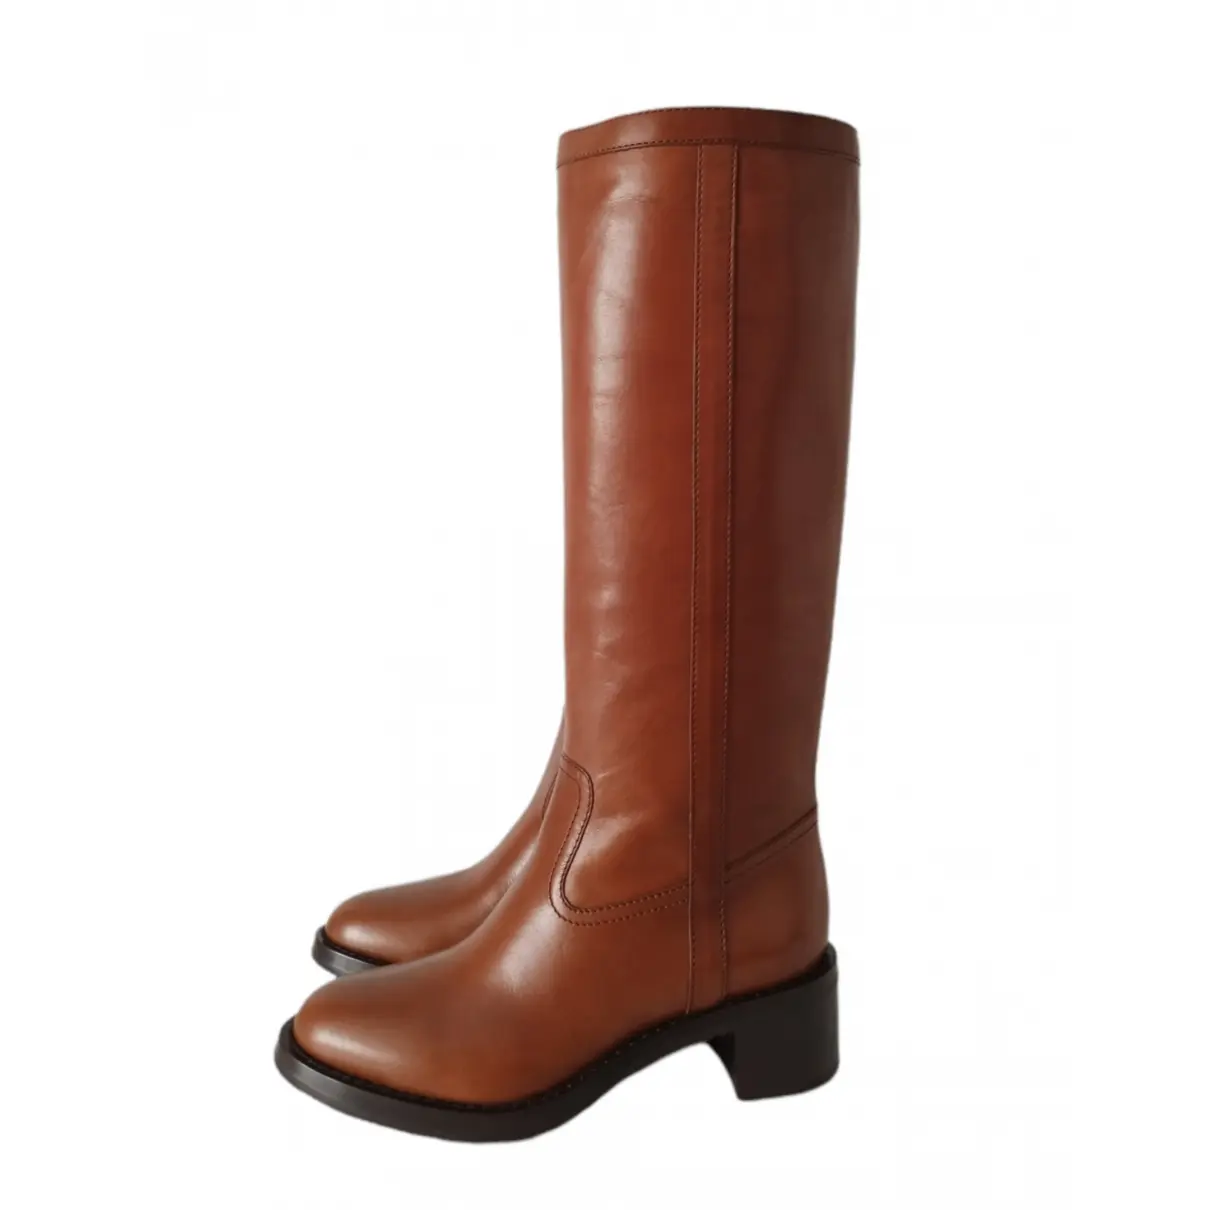 Folco leather riding boots Celine